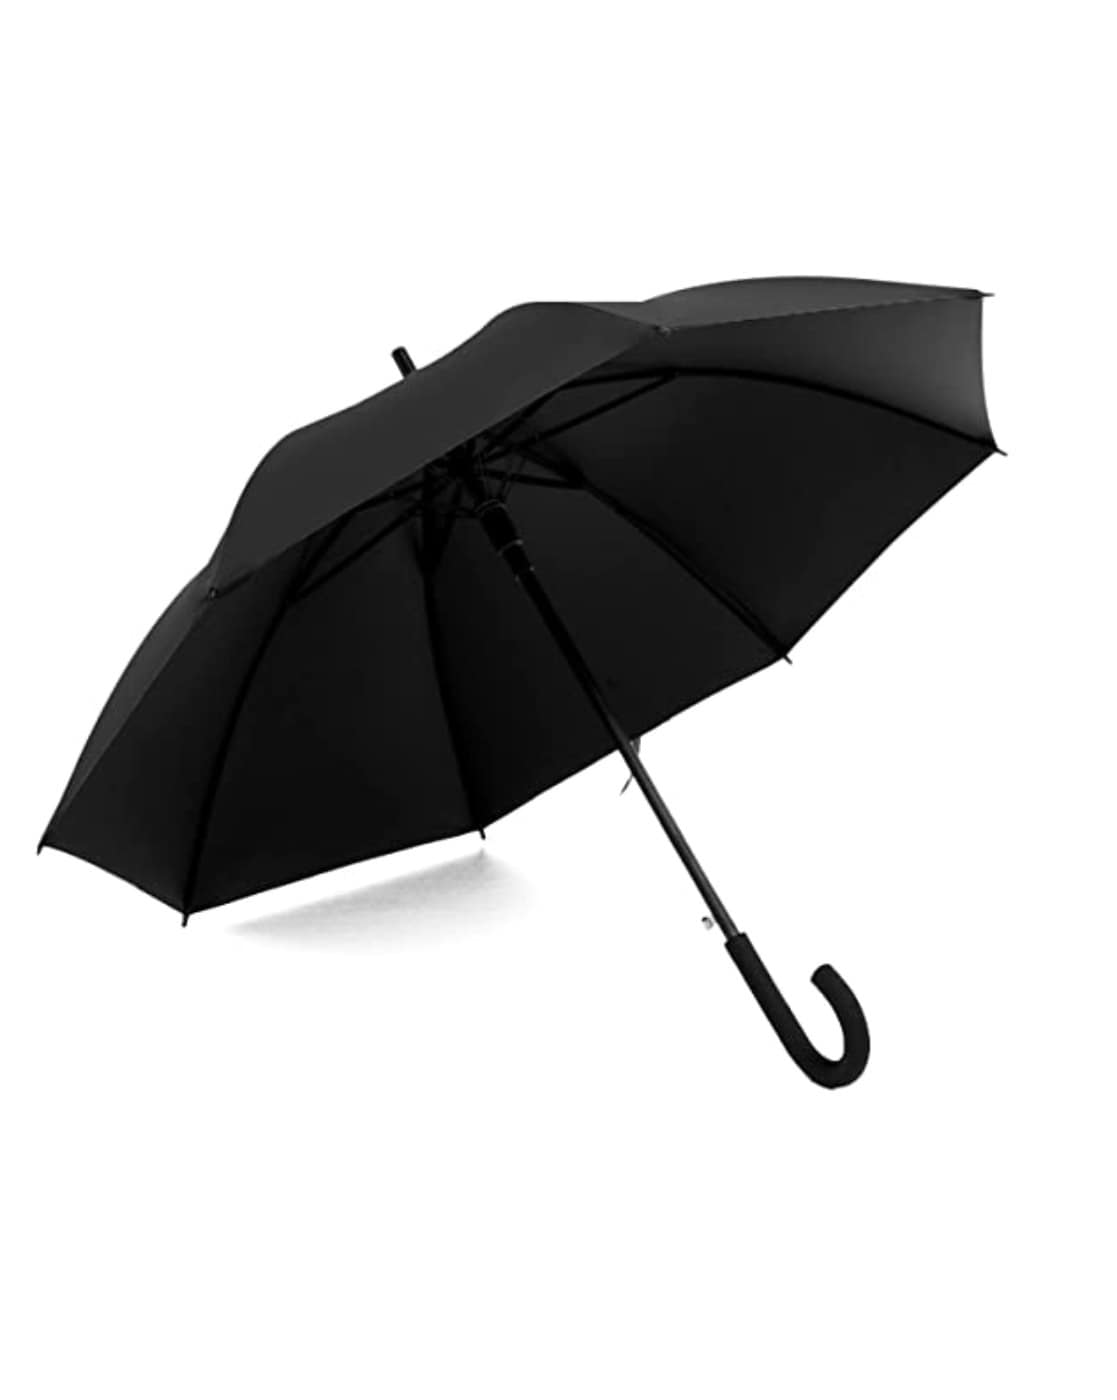 Personalized Black Rain & UV Protection Straight, Strong & Windproof Umbrella - For Corporate Gifting, Event Gifting, Freebies, Promotions, Rainwear, Rainy Season Gift Item - TGMPCW2